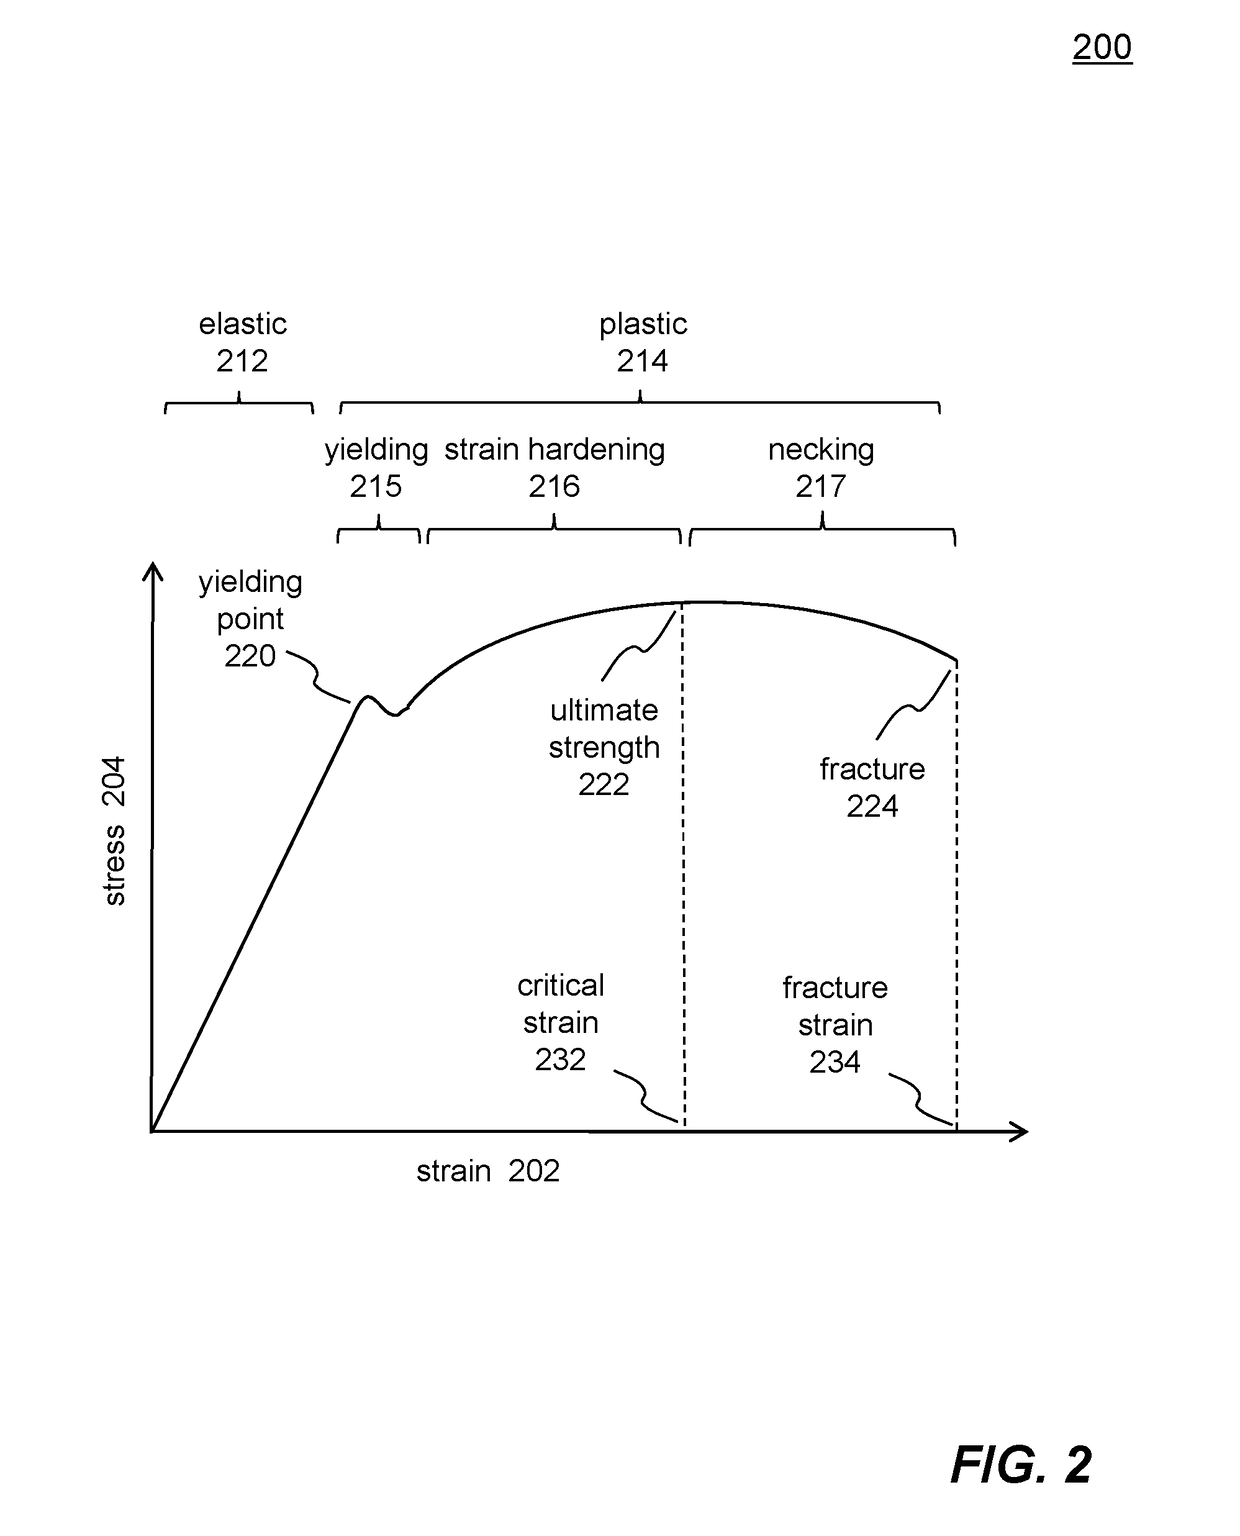 Methods And Systems For Conducting A Time-Marching Numerical Simulation Of A Deep Drawing Metal Forming Process For Manufacturing A Product or Part